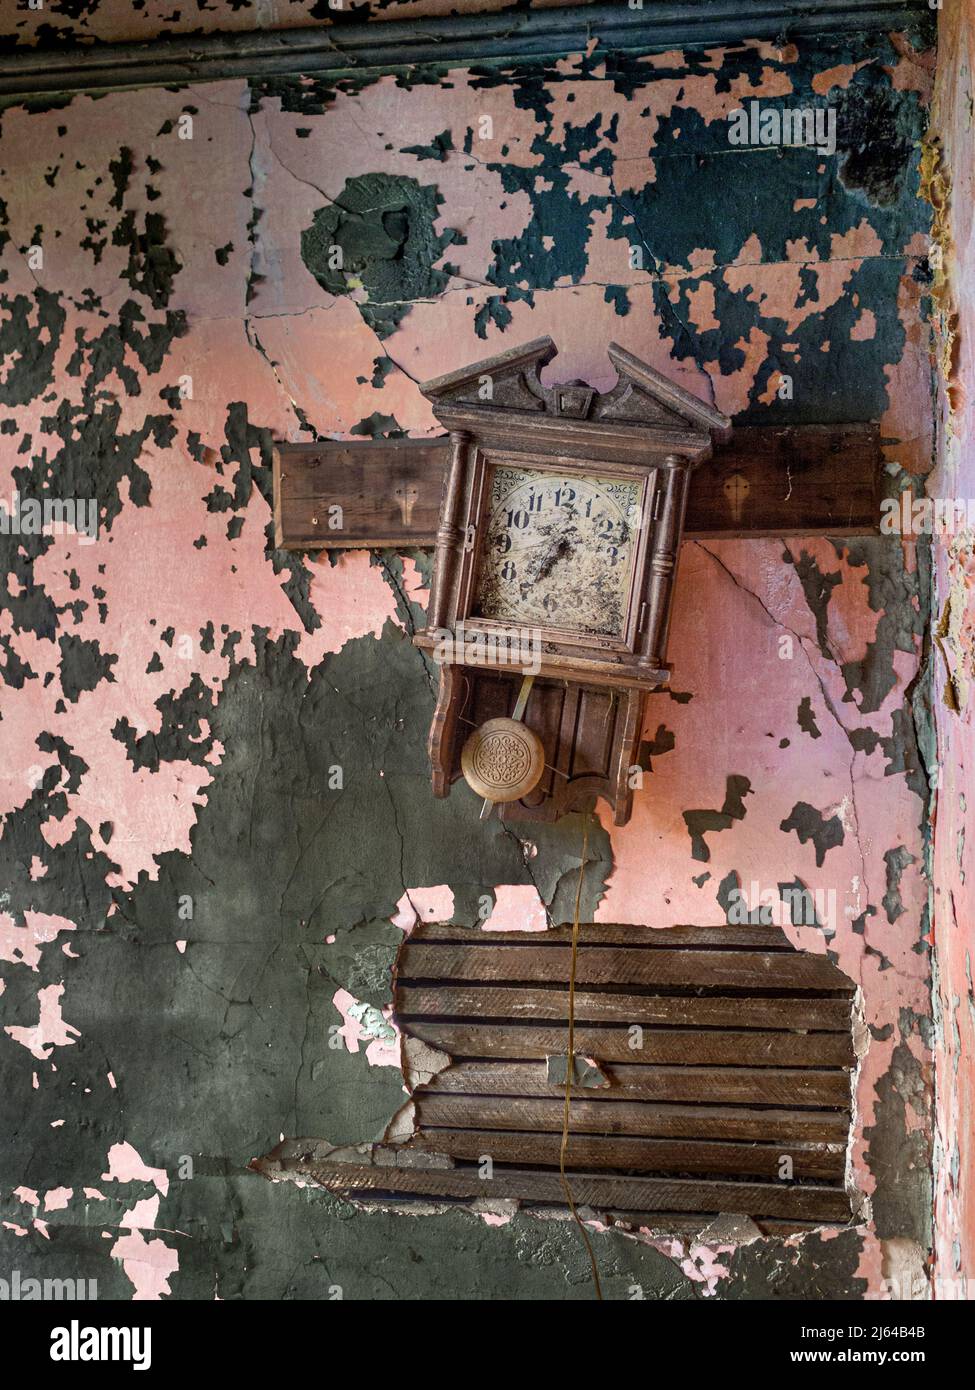 A crooked clock and an old plaster wall showing the layers of paint are fixtures in this abandoned house. Stock Photo